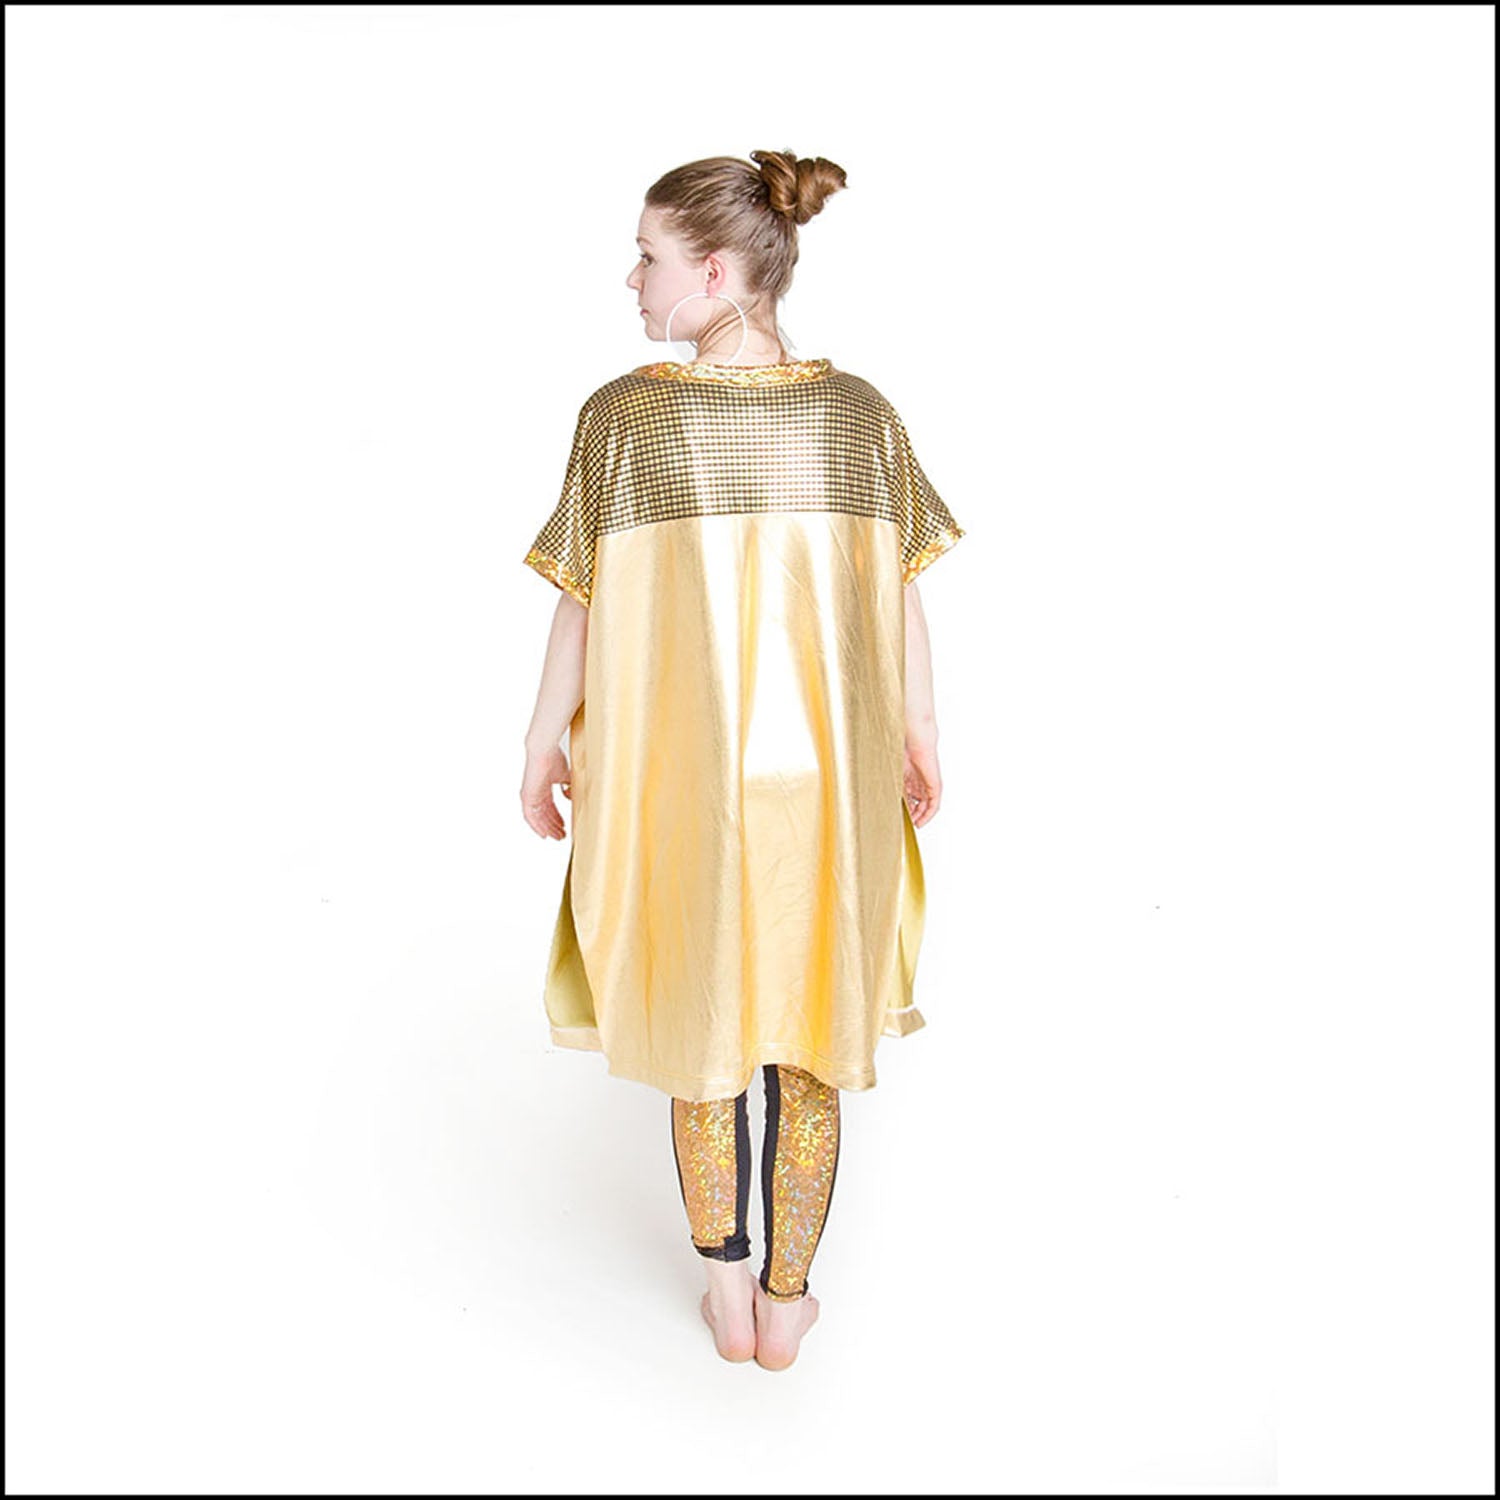 Liquid foil gold kimono with contrast gold on black grid print and holographic gold trim. 